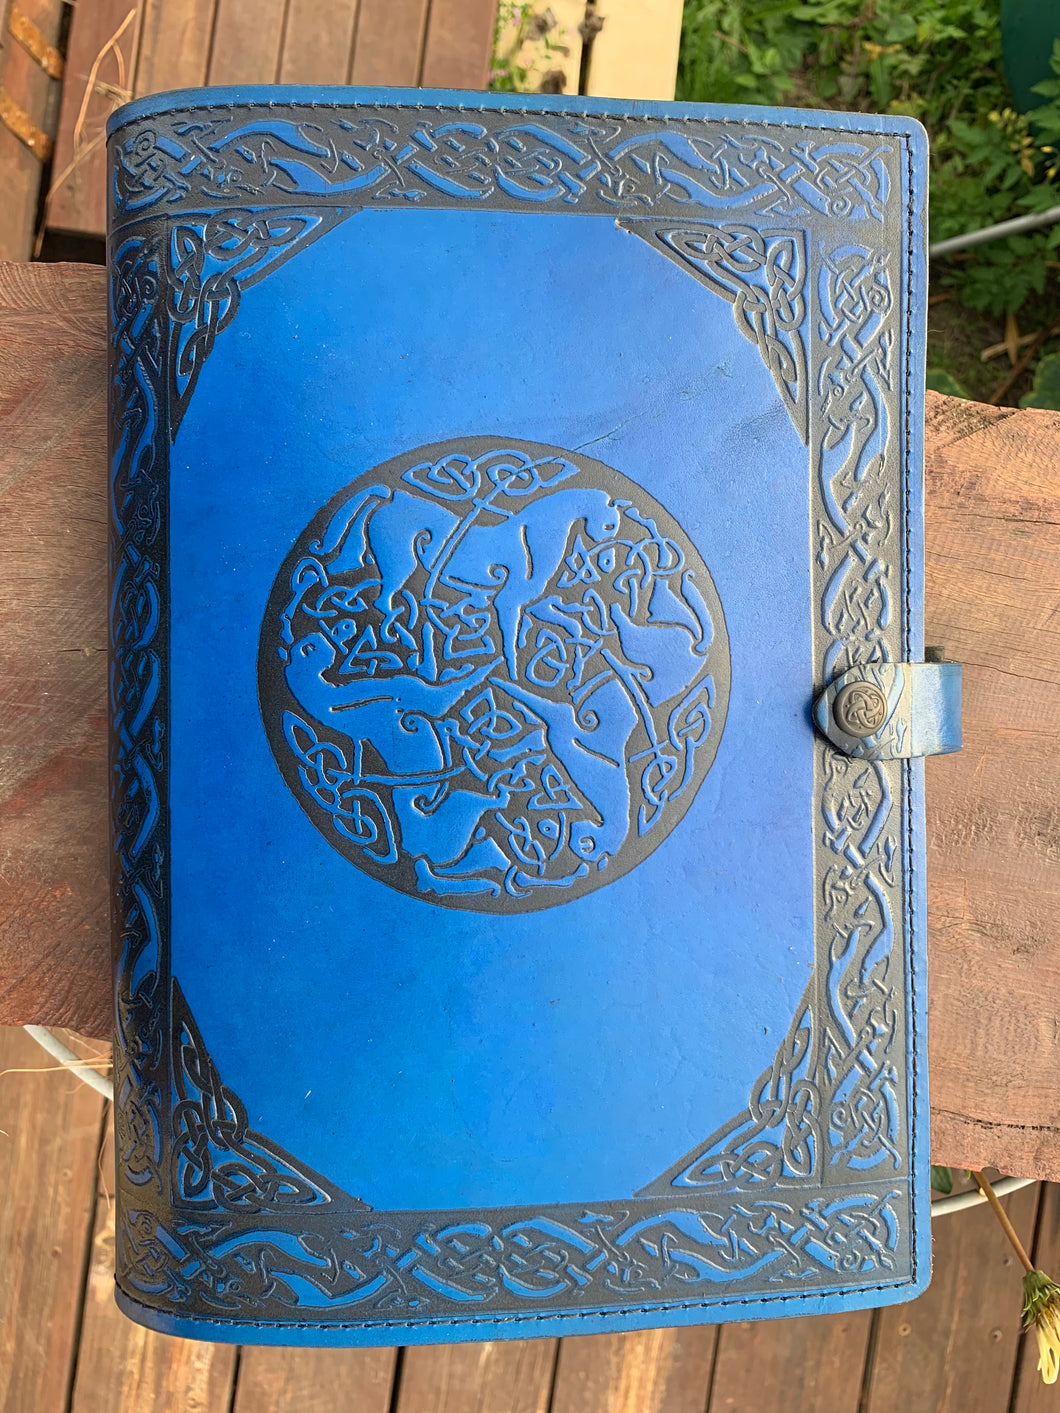 A4 Leather Journal Cover - Celtic Horses - Blue